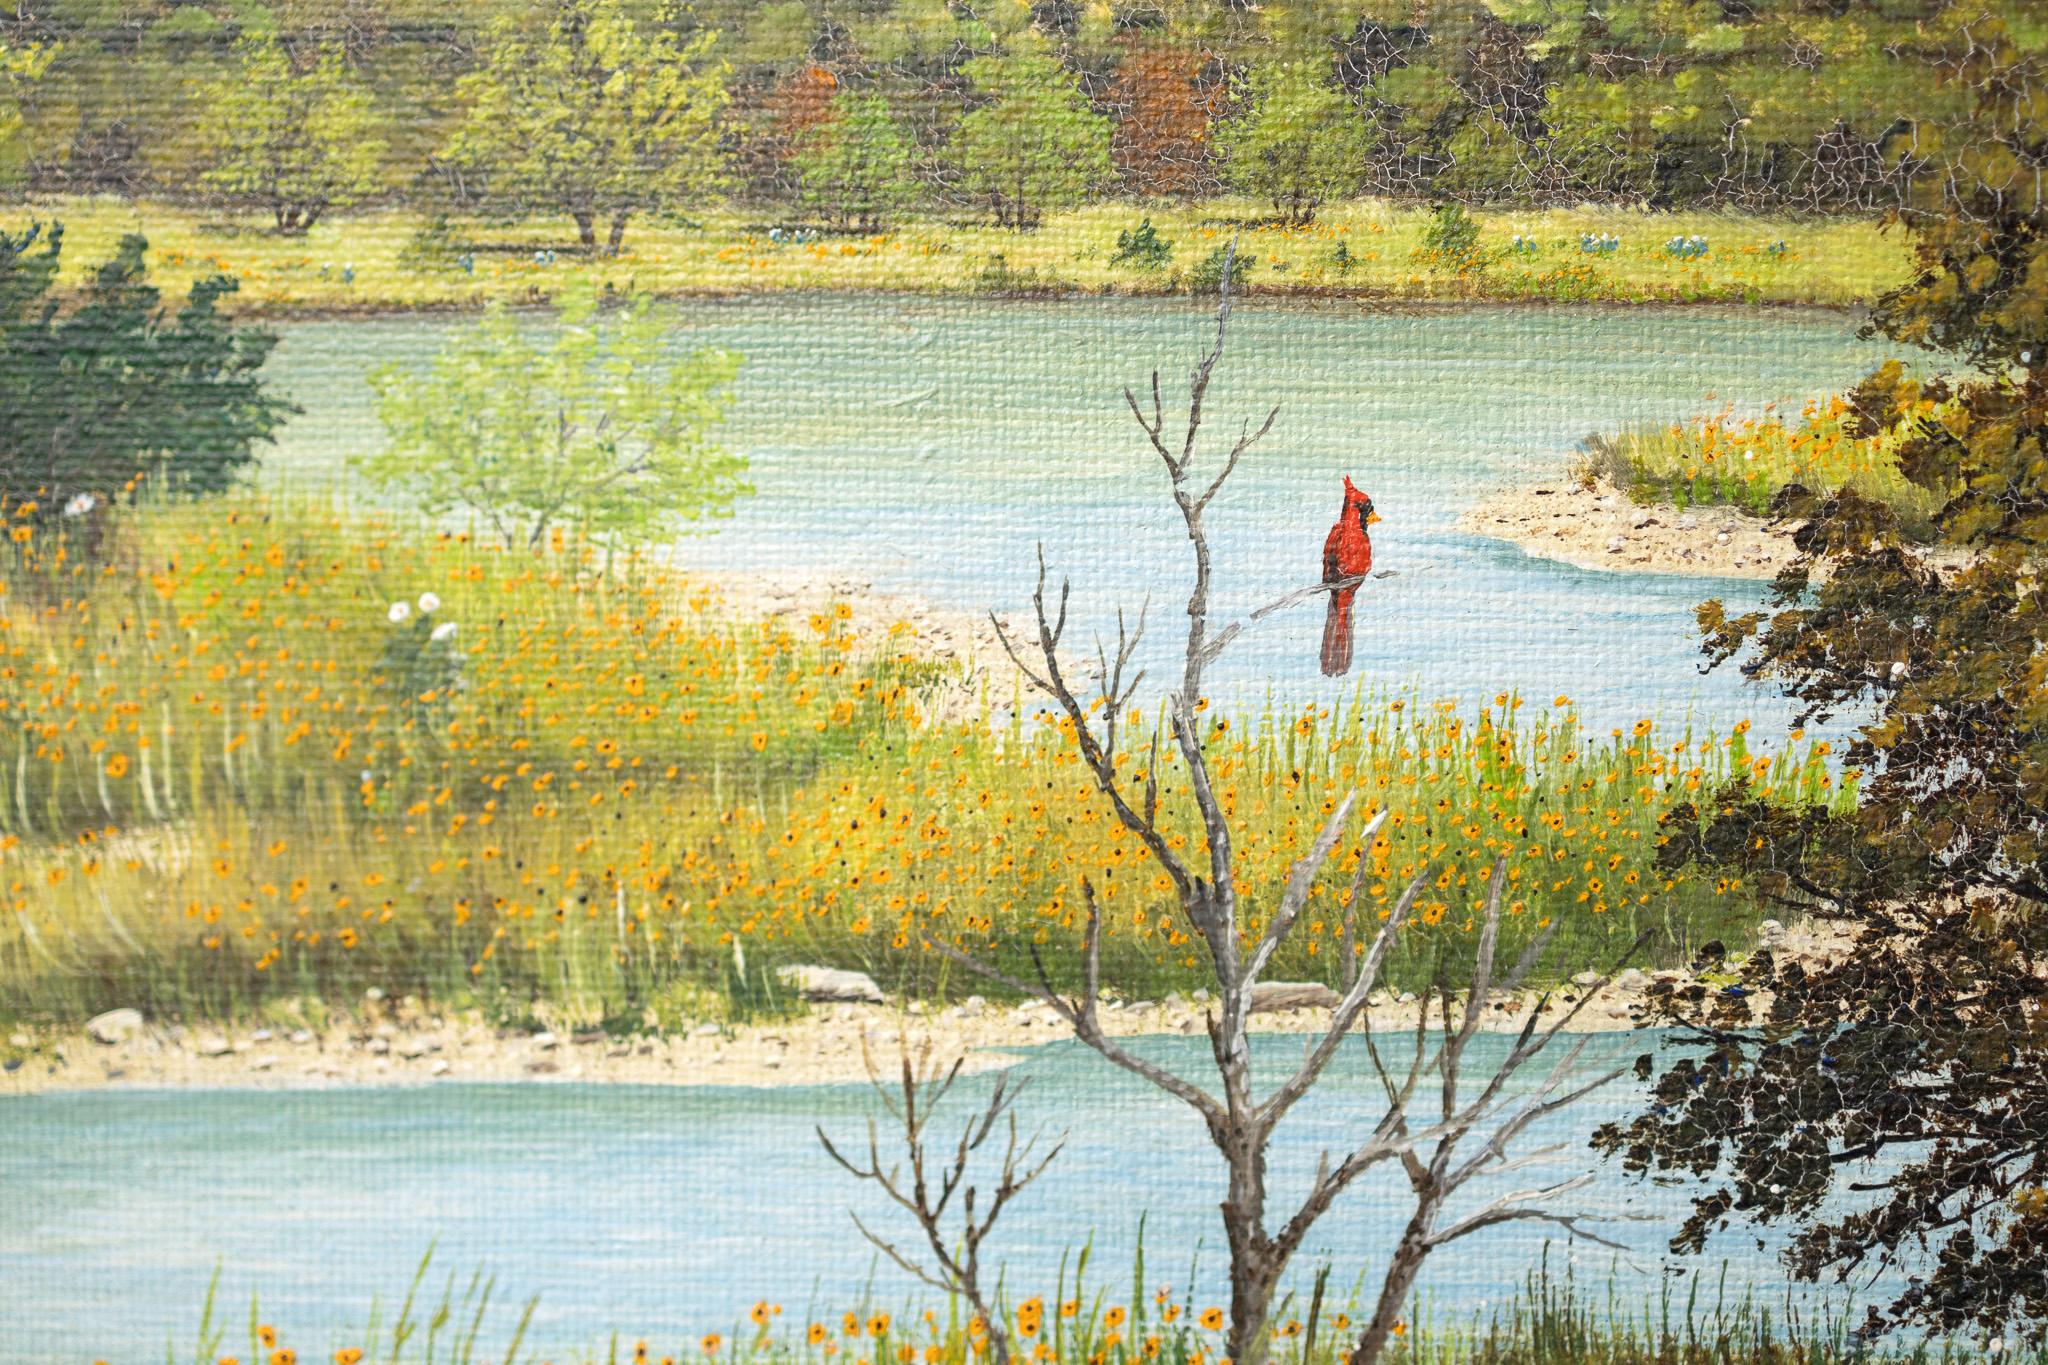 This cheerful painting by Texas artist Manuel Garza depicts a view of a winding river in the springtime with yellow wildflowers. A vibrant red cardinal sits perched atop a branch, admiring the Texas landscape. 
9 x 12 inches
Oil on Canvas

About the